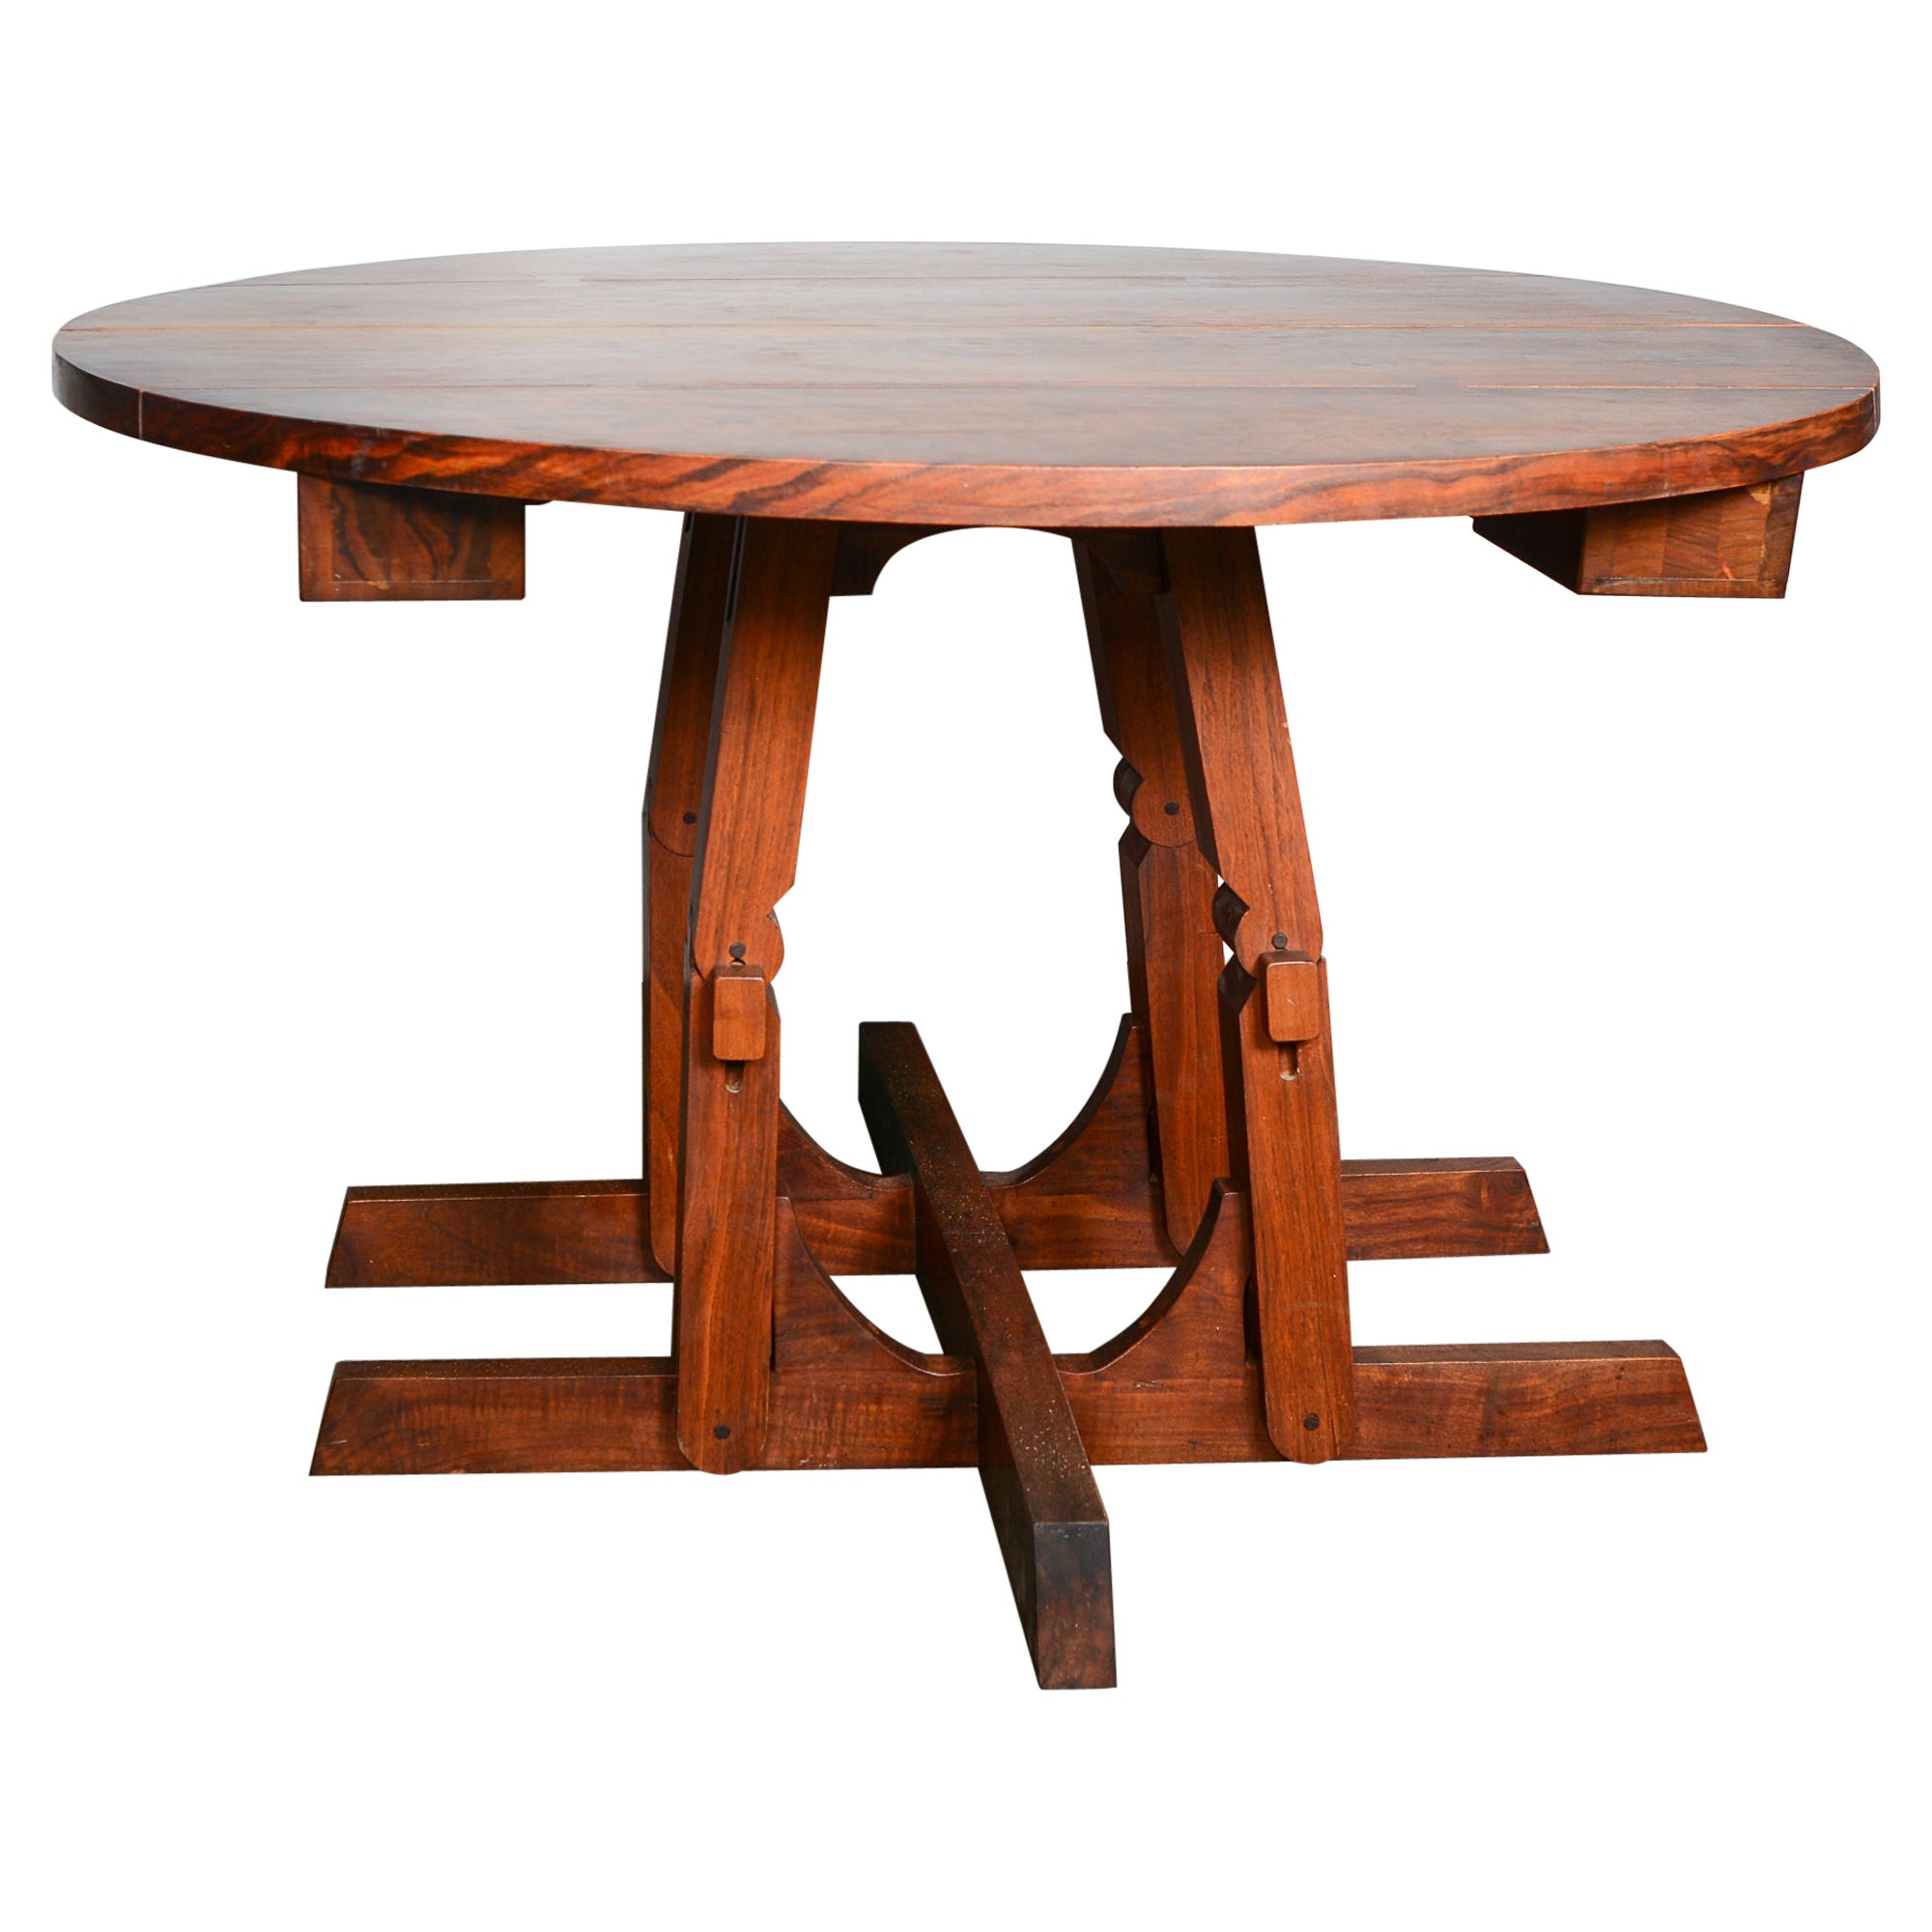 Walnut Dining Table with Four Leaves by Designer and Craftsman Morris Sheppard For Sale